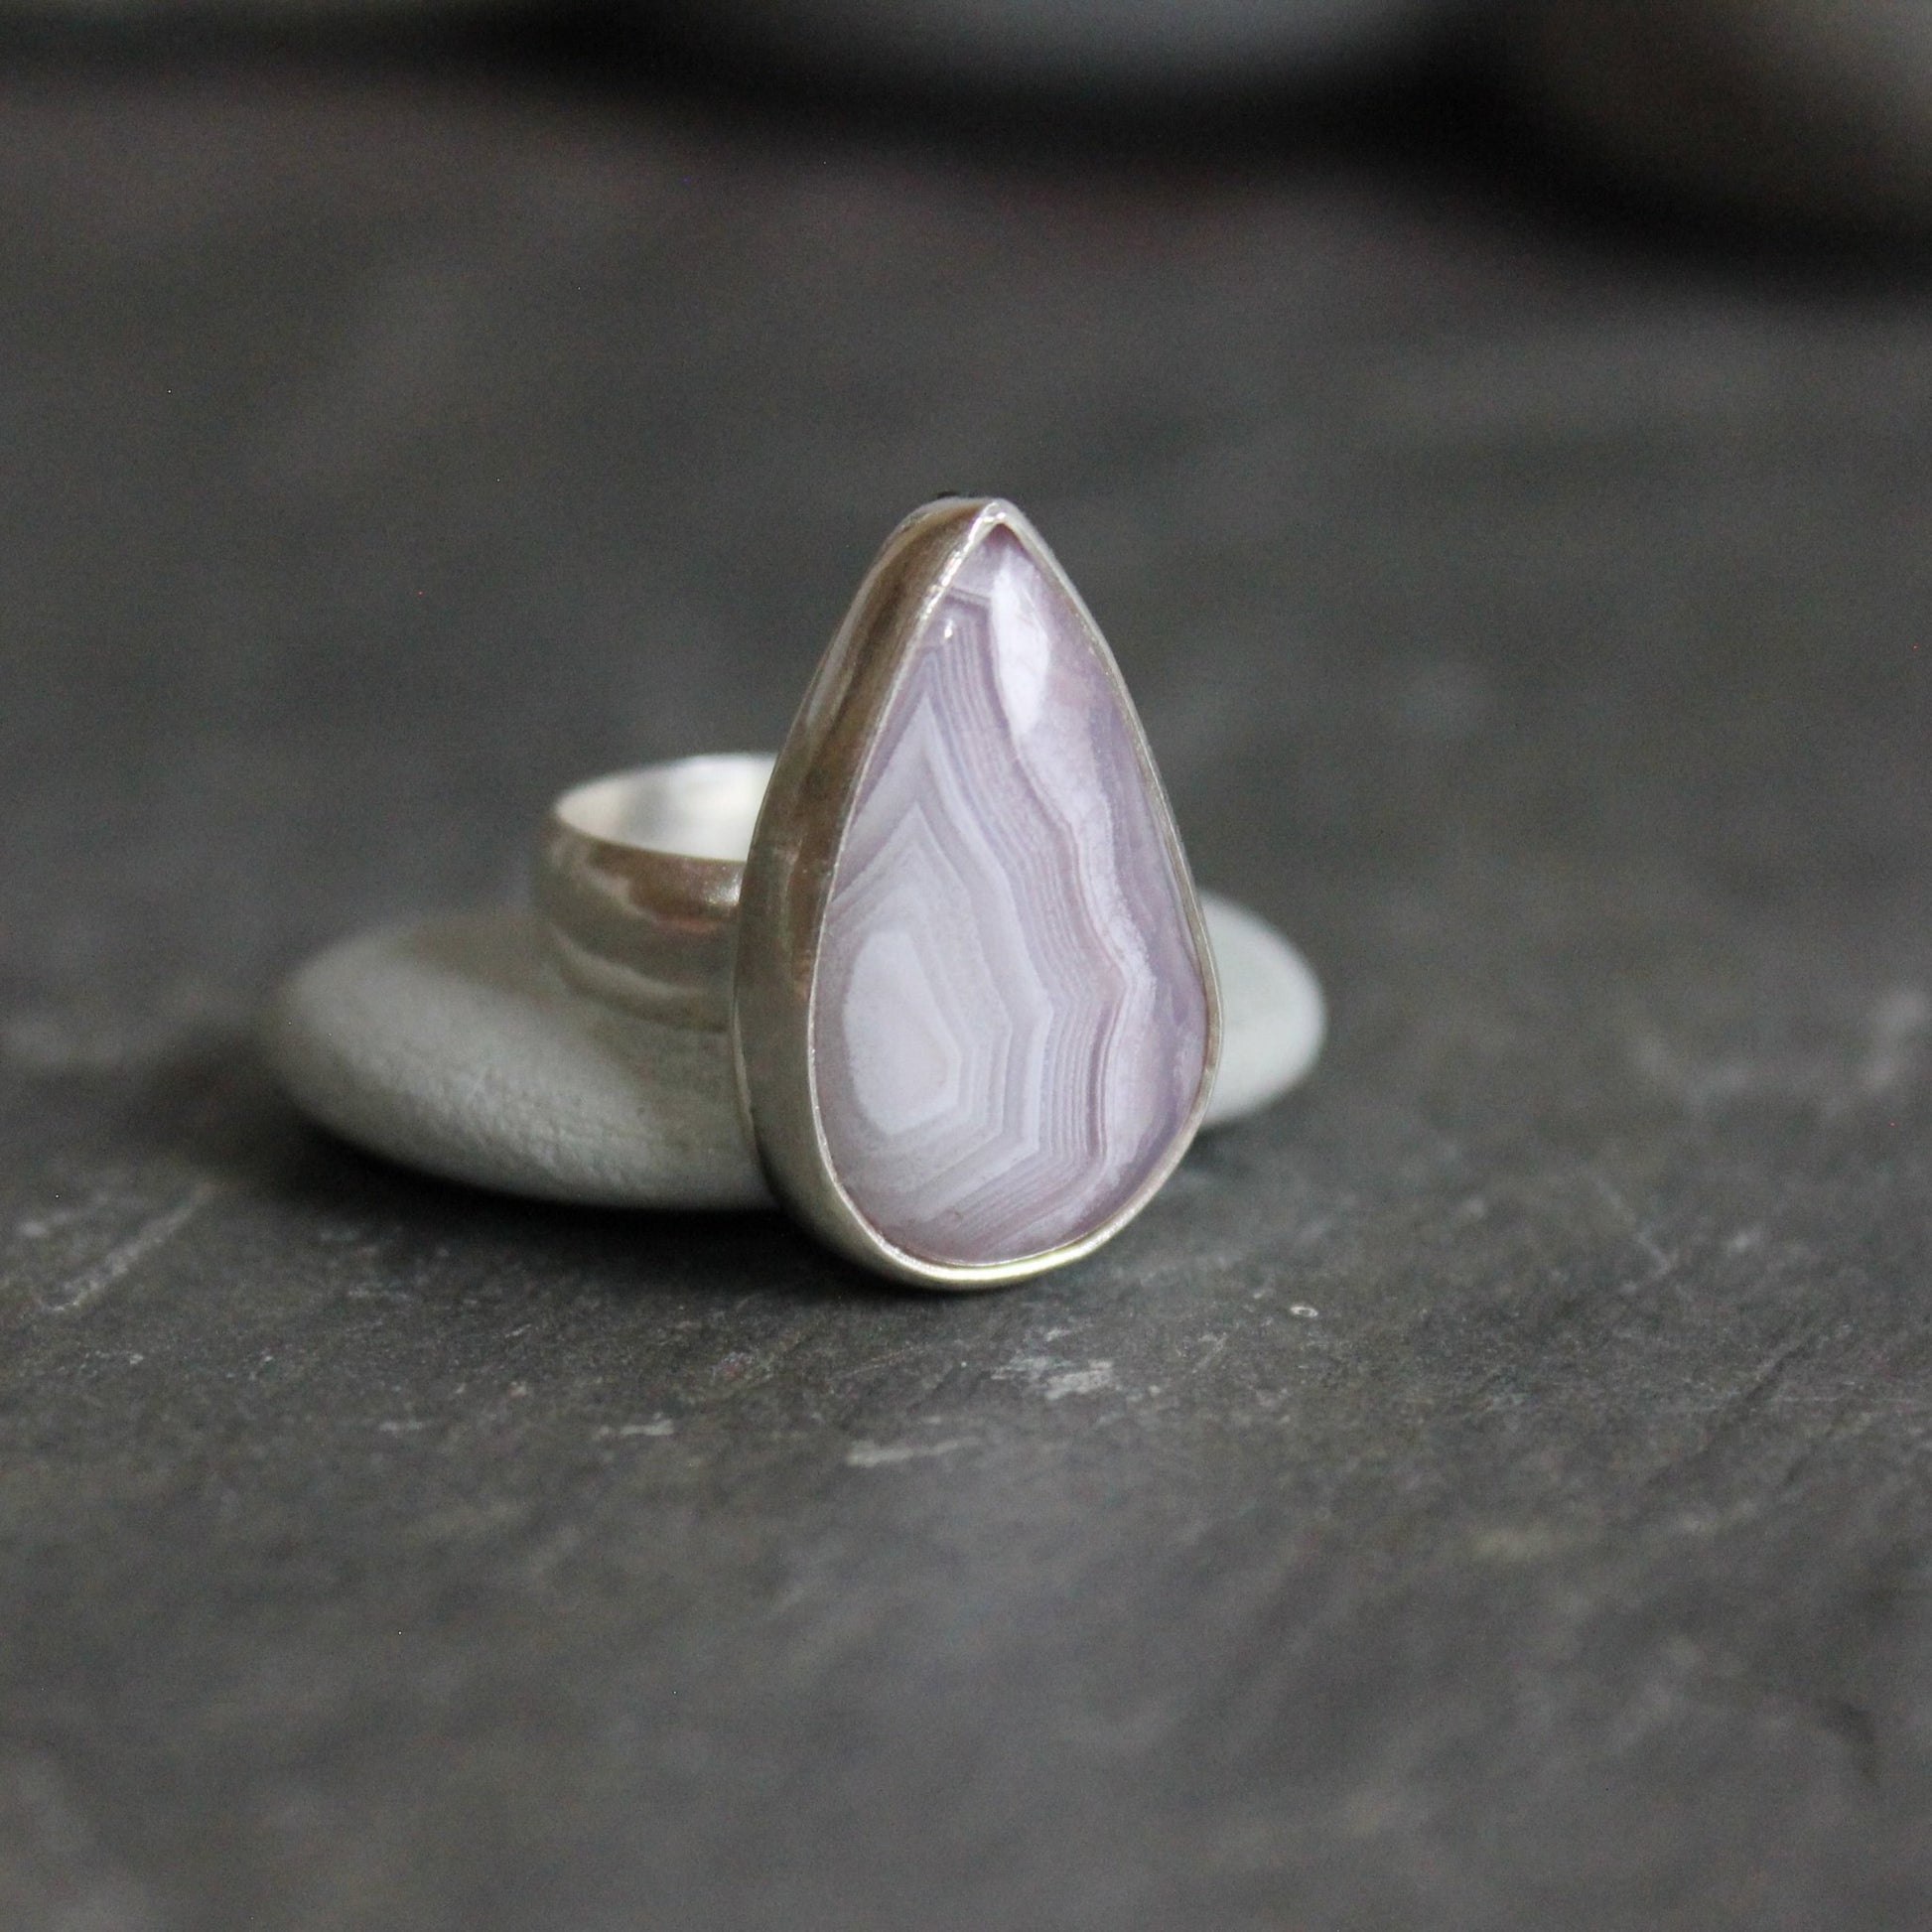 This is a teardrop agua nueva agate from Mexico that has banding and is set in a fine and sterling silver bezel setting on a sturdy silver band.  Size 4 1/4